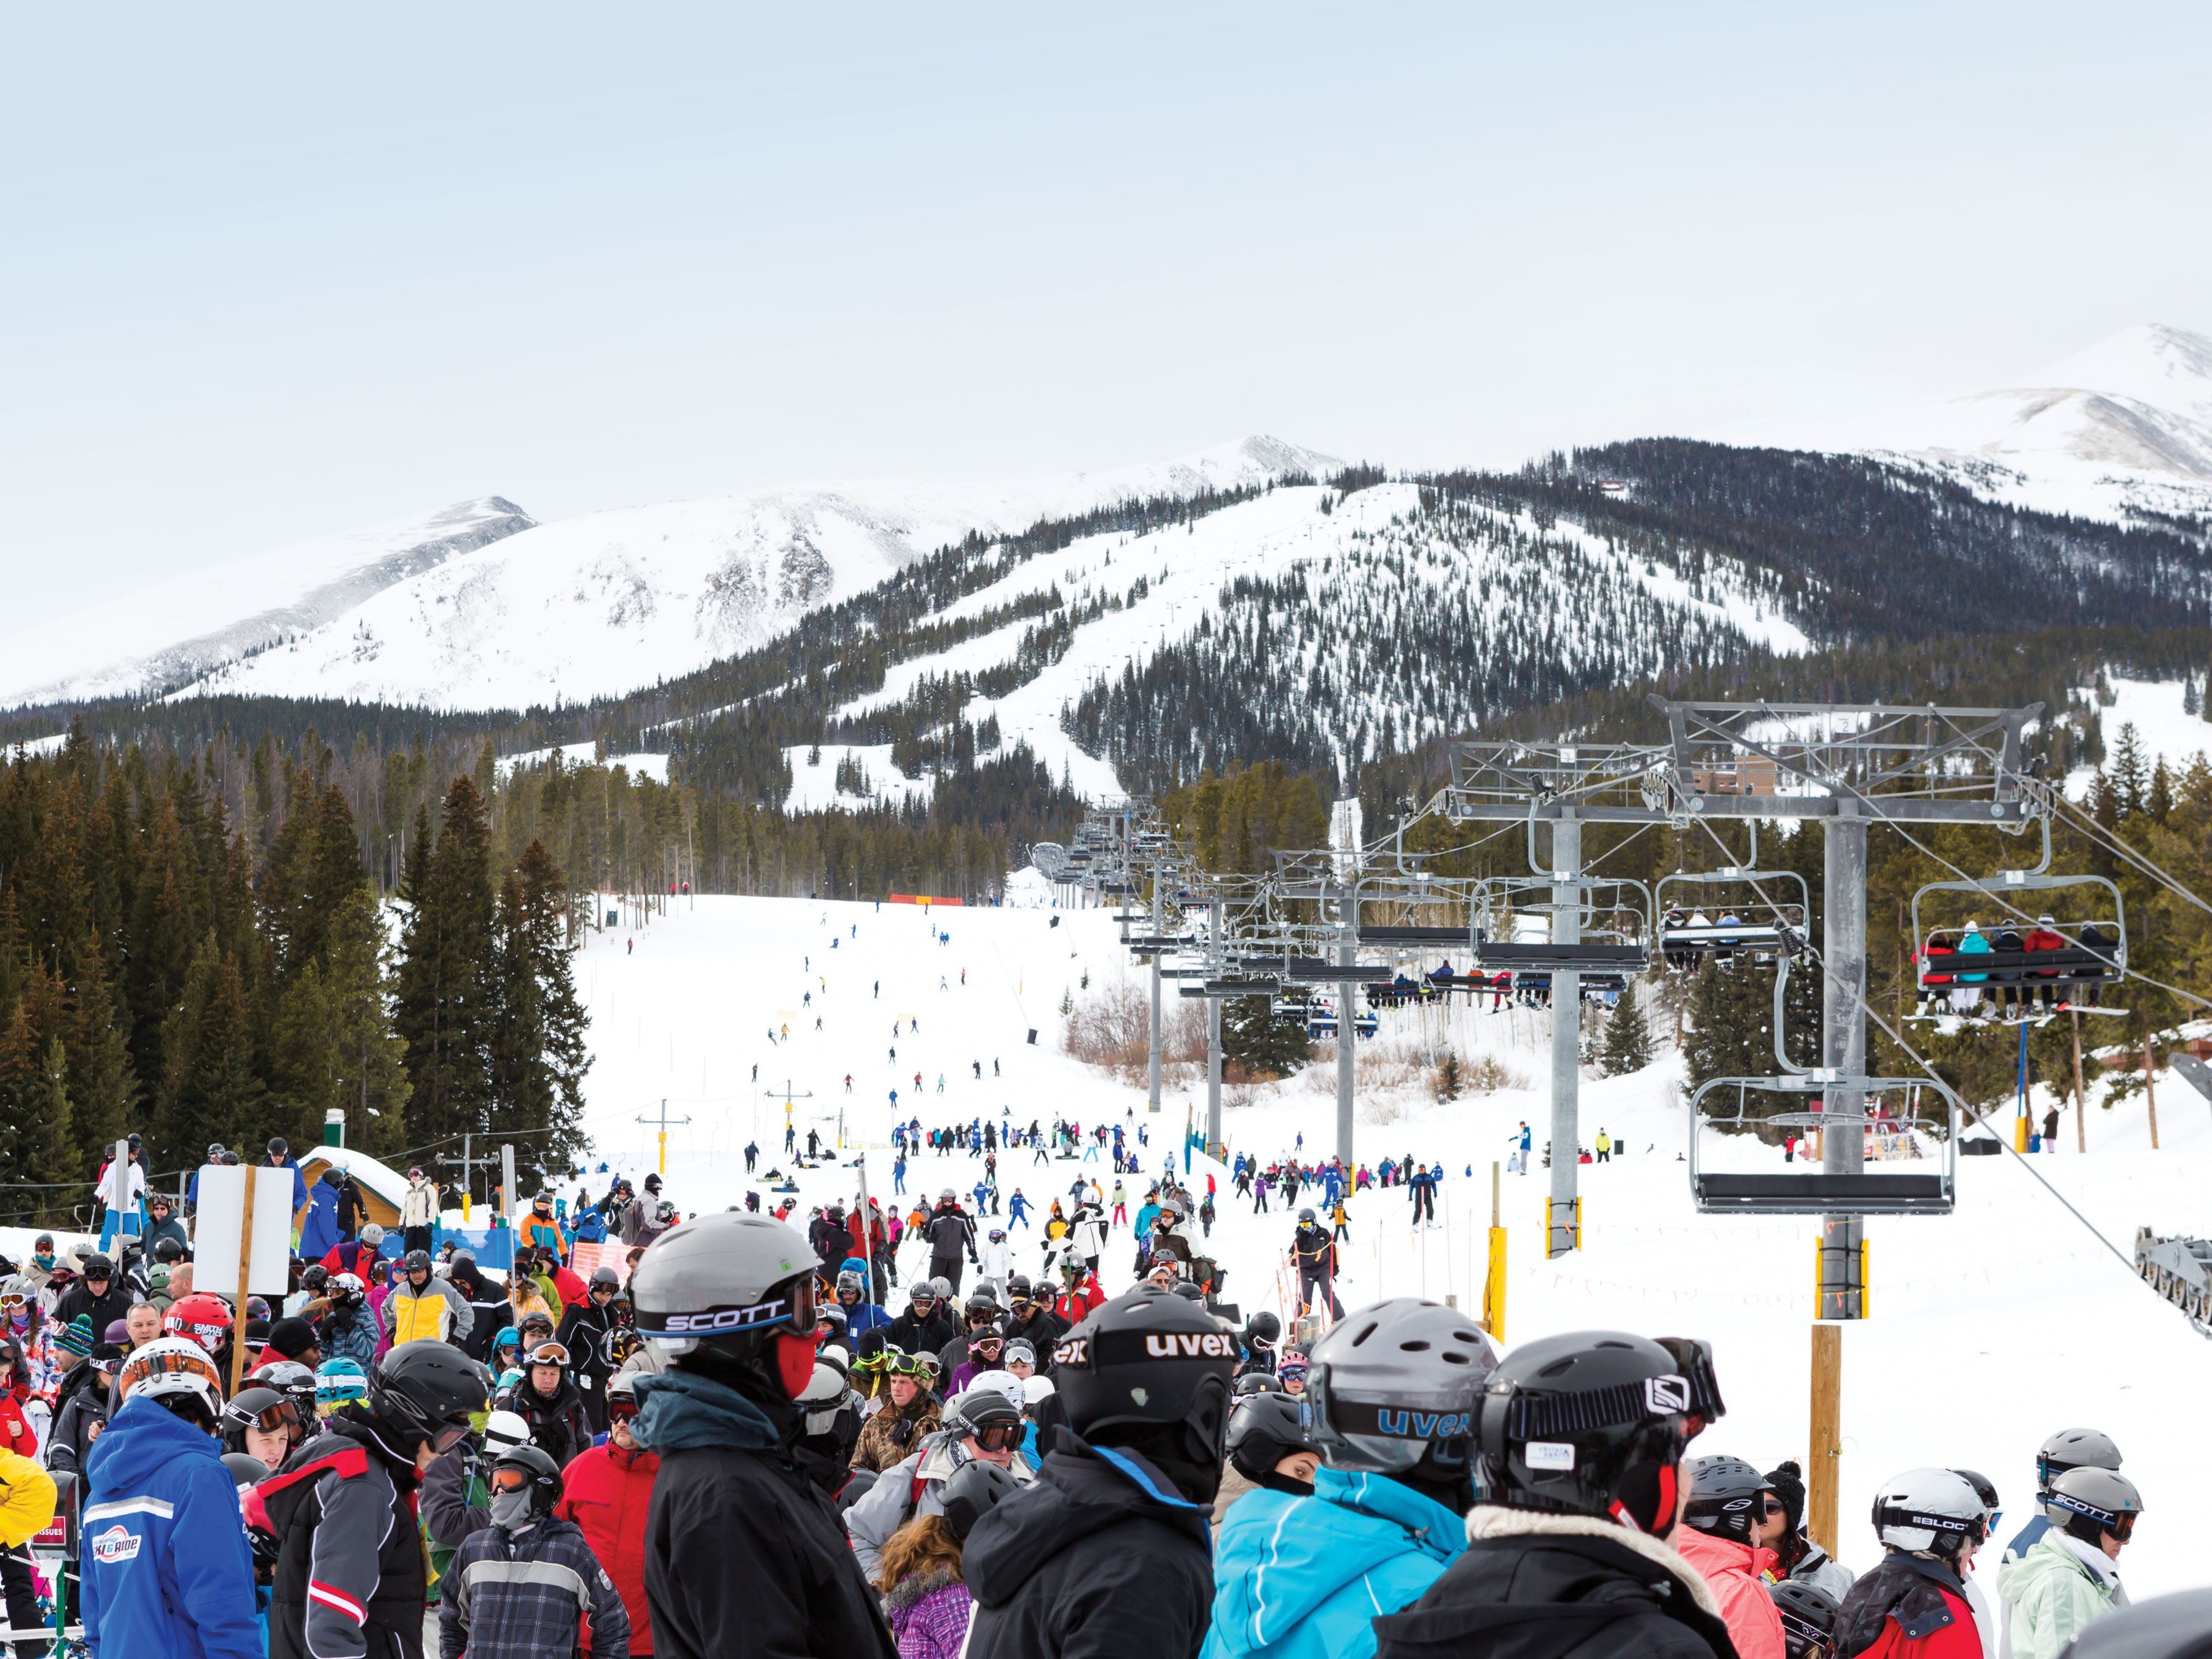 Image of a busy ski slope in the winter